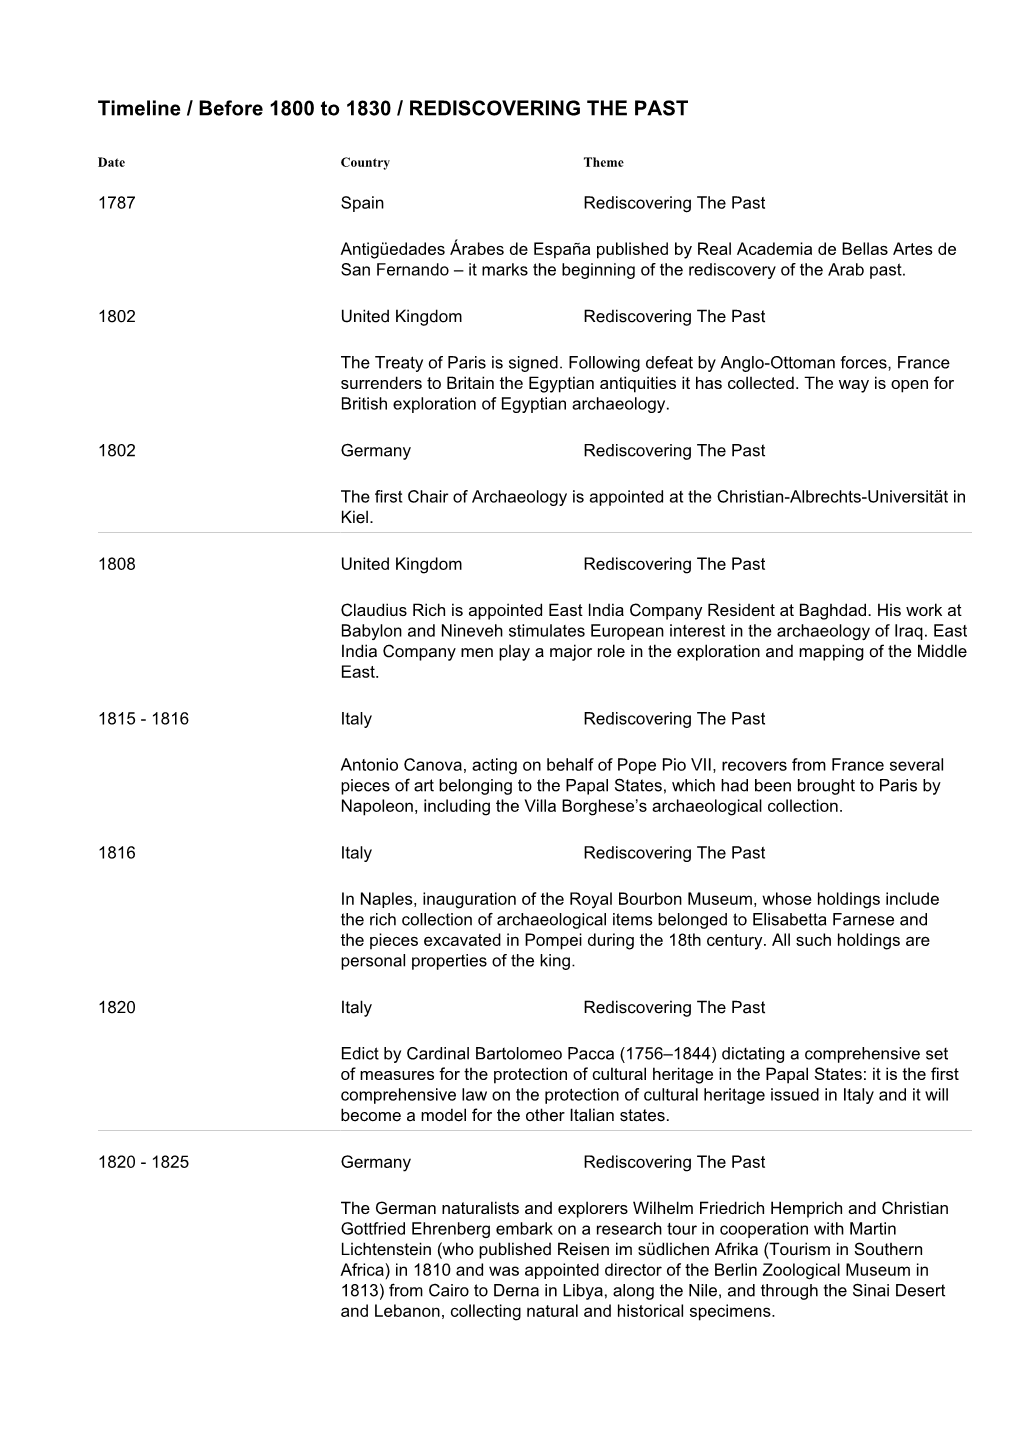 Timeline / Before 1800 to 1830 / REDISCOVERING the PAST